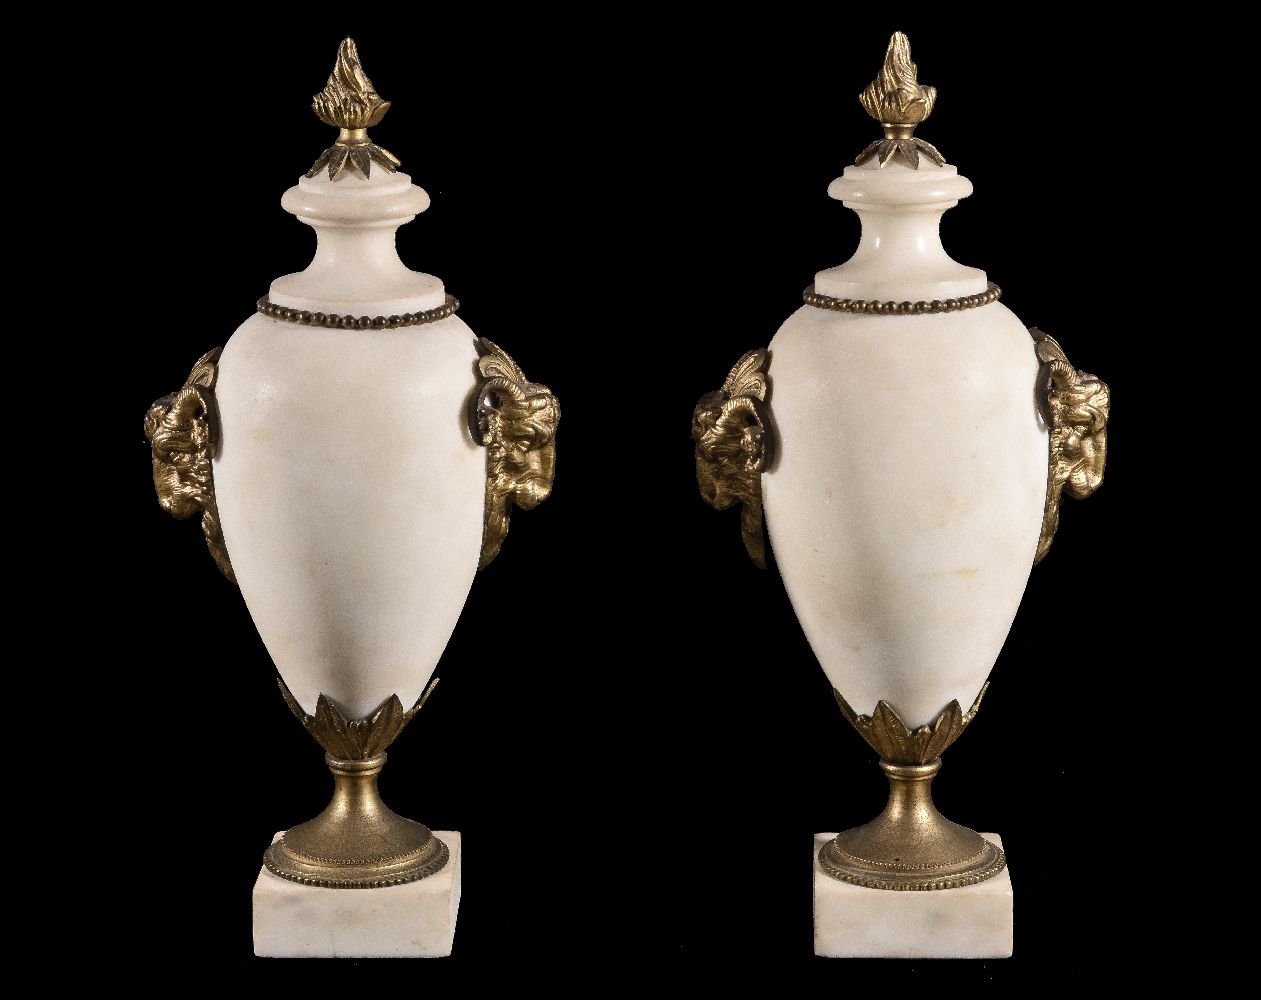 A pair of French white marble and gilt bronze mounted urns in Neoclassical style, circa 1875, with